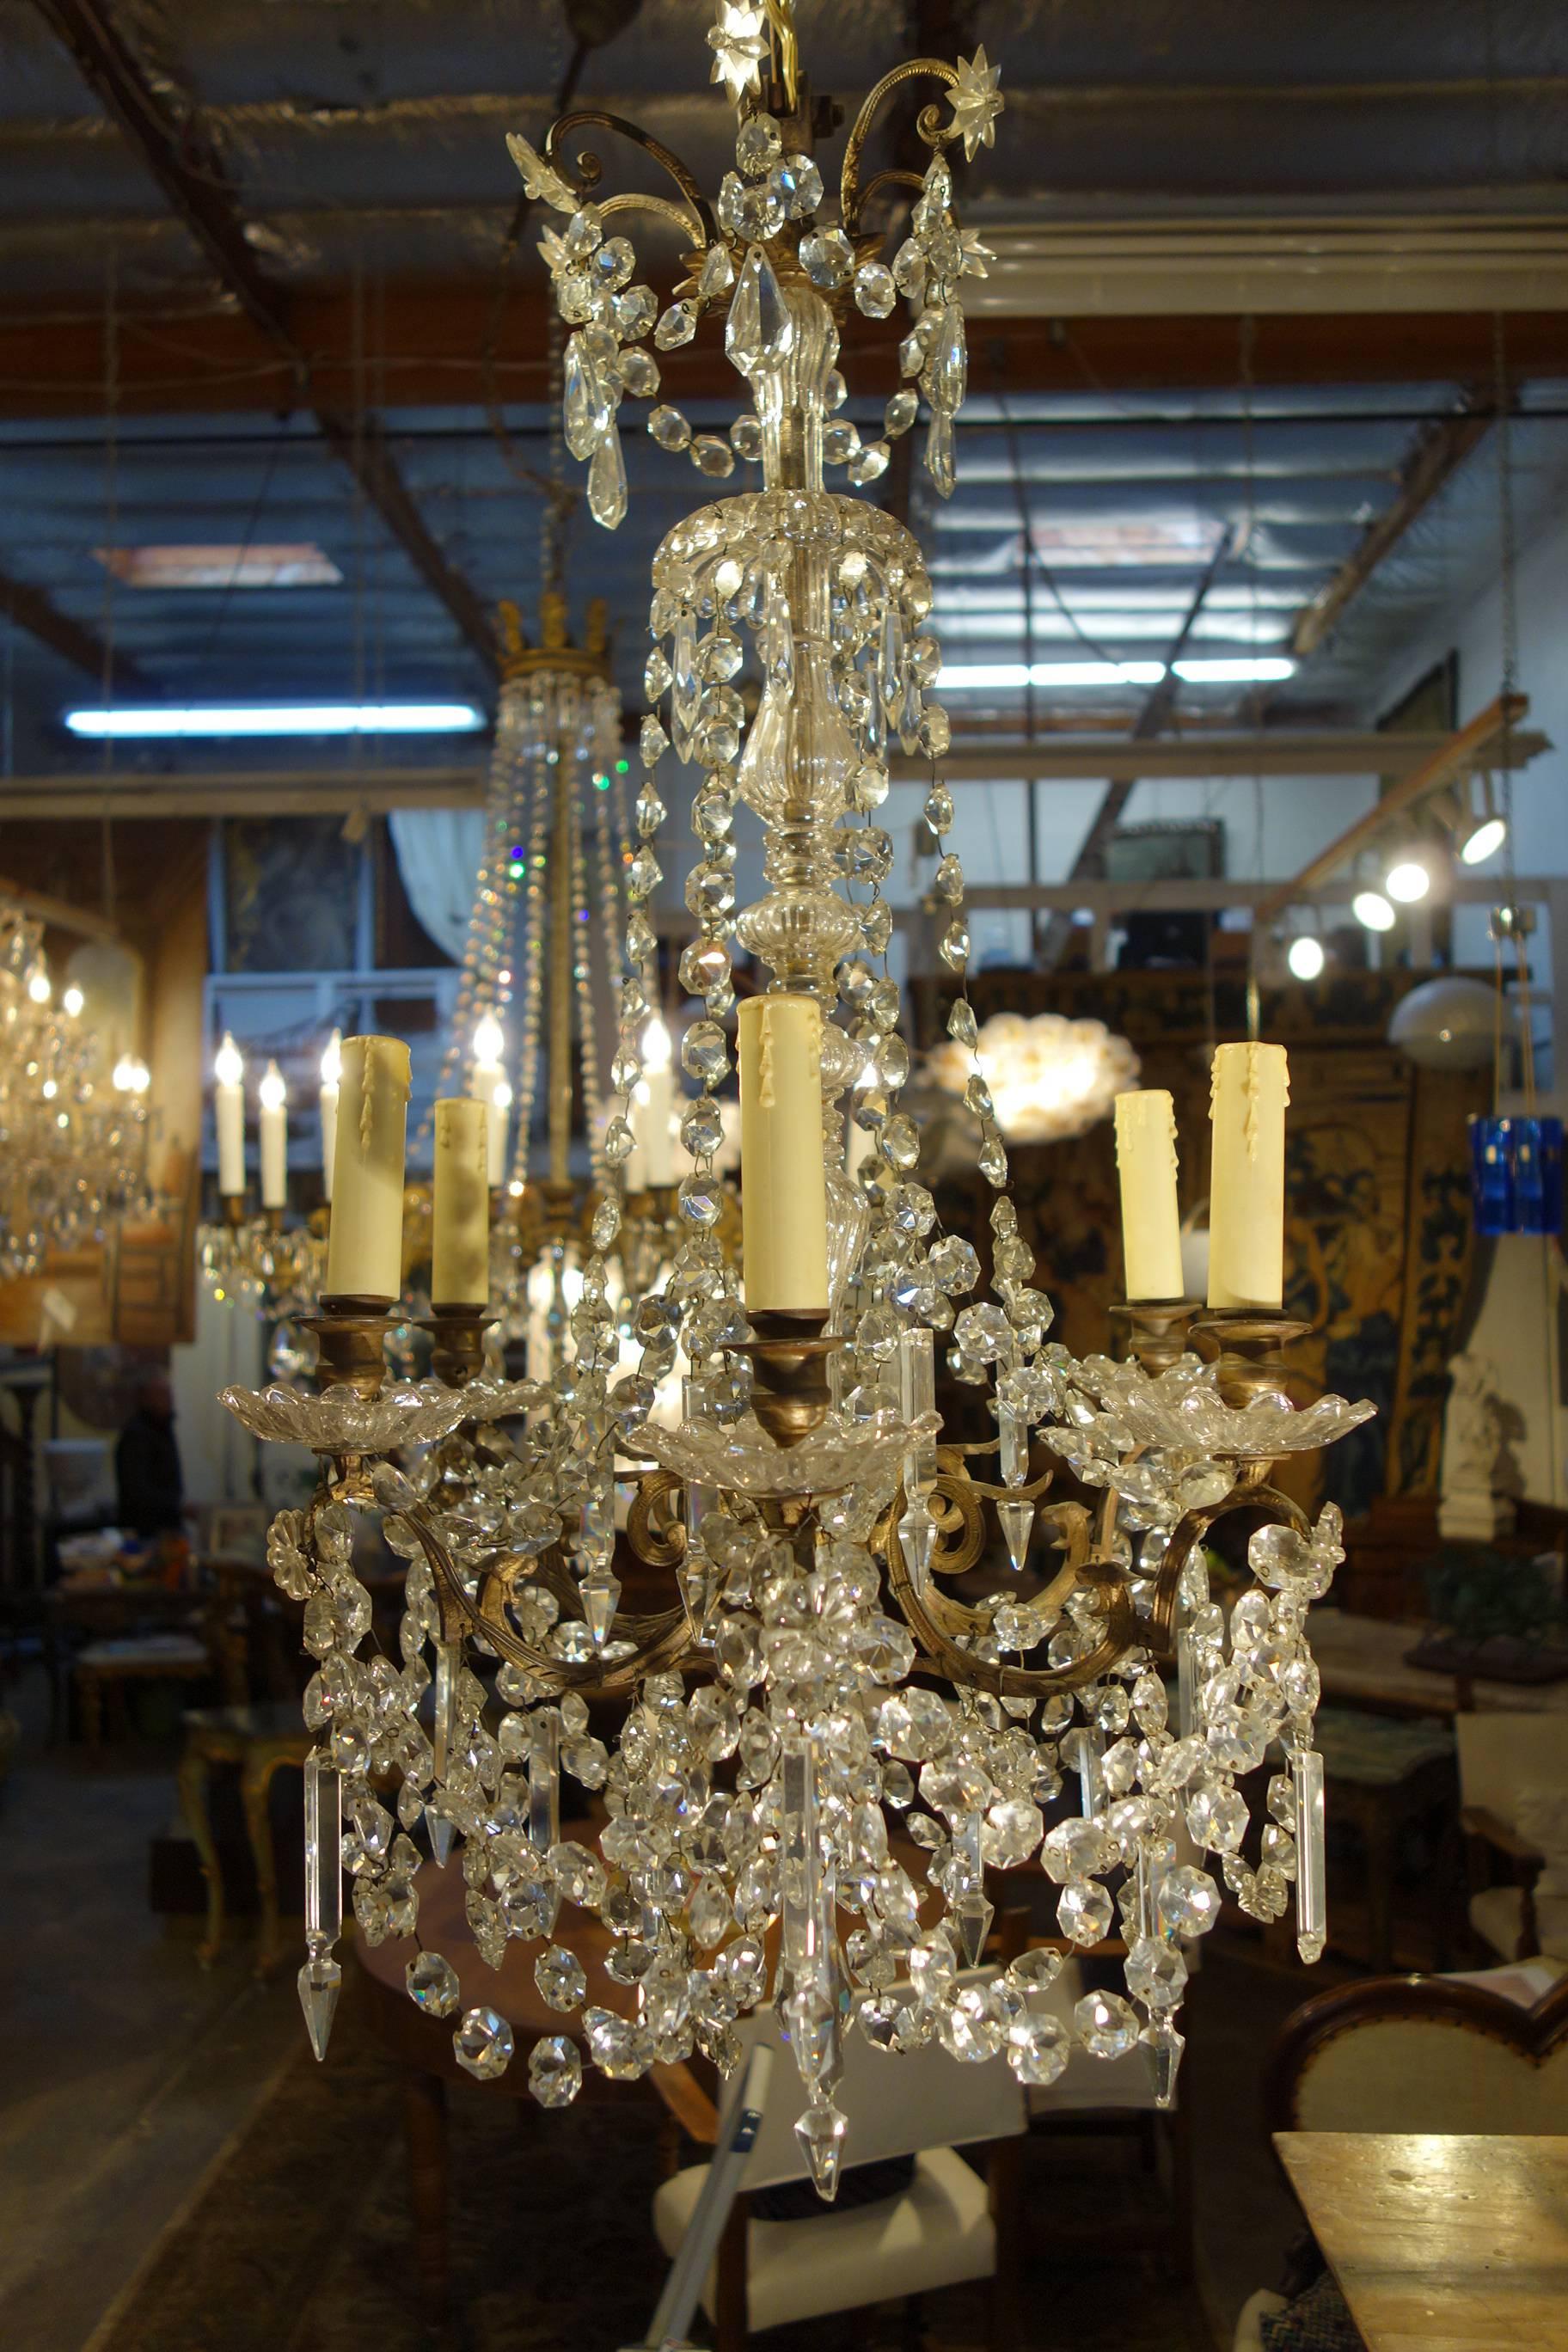 Elegant Empire style chandelier, opulent yet compact, featuring 6 crystal cups supported by delightful winged dragons on brass rocaille arms. Delicate, faceted glass beads, baubles and strands surround the central glass column.
Measures: 32